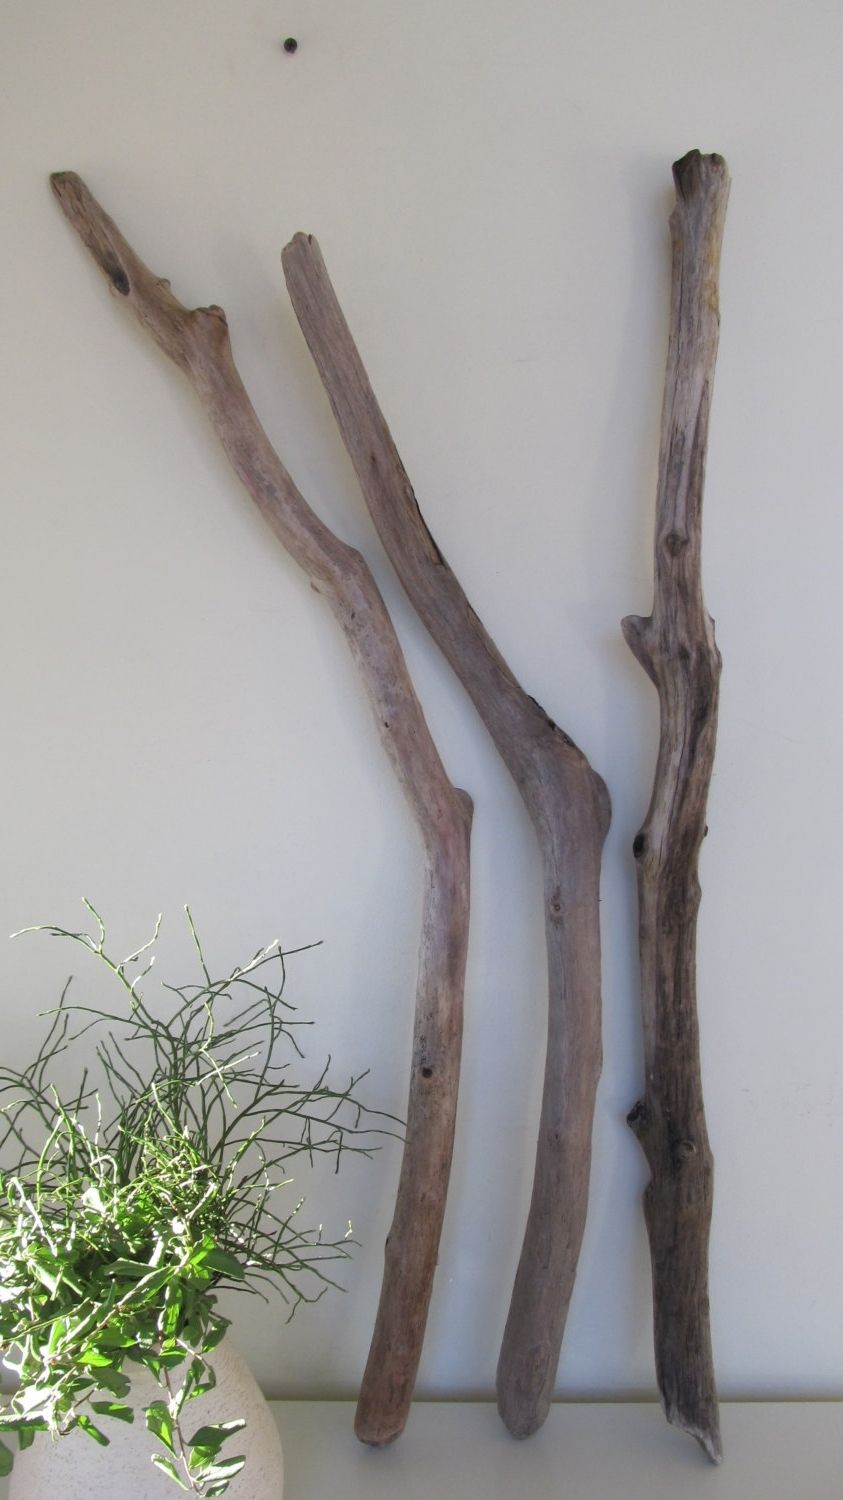 Large Driftwood Wall Art Throughout Preferred Diy Driftwood Wall Hanging Crafts & Decorations – 3 Large (View 11 of 15)